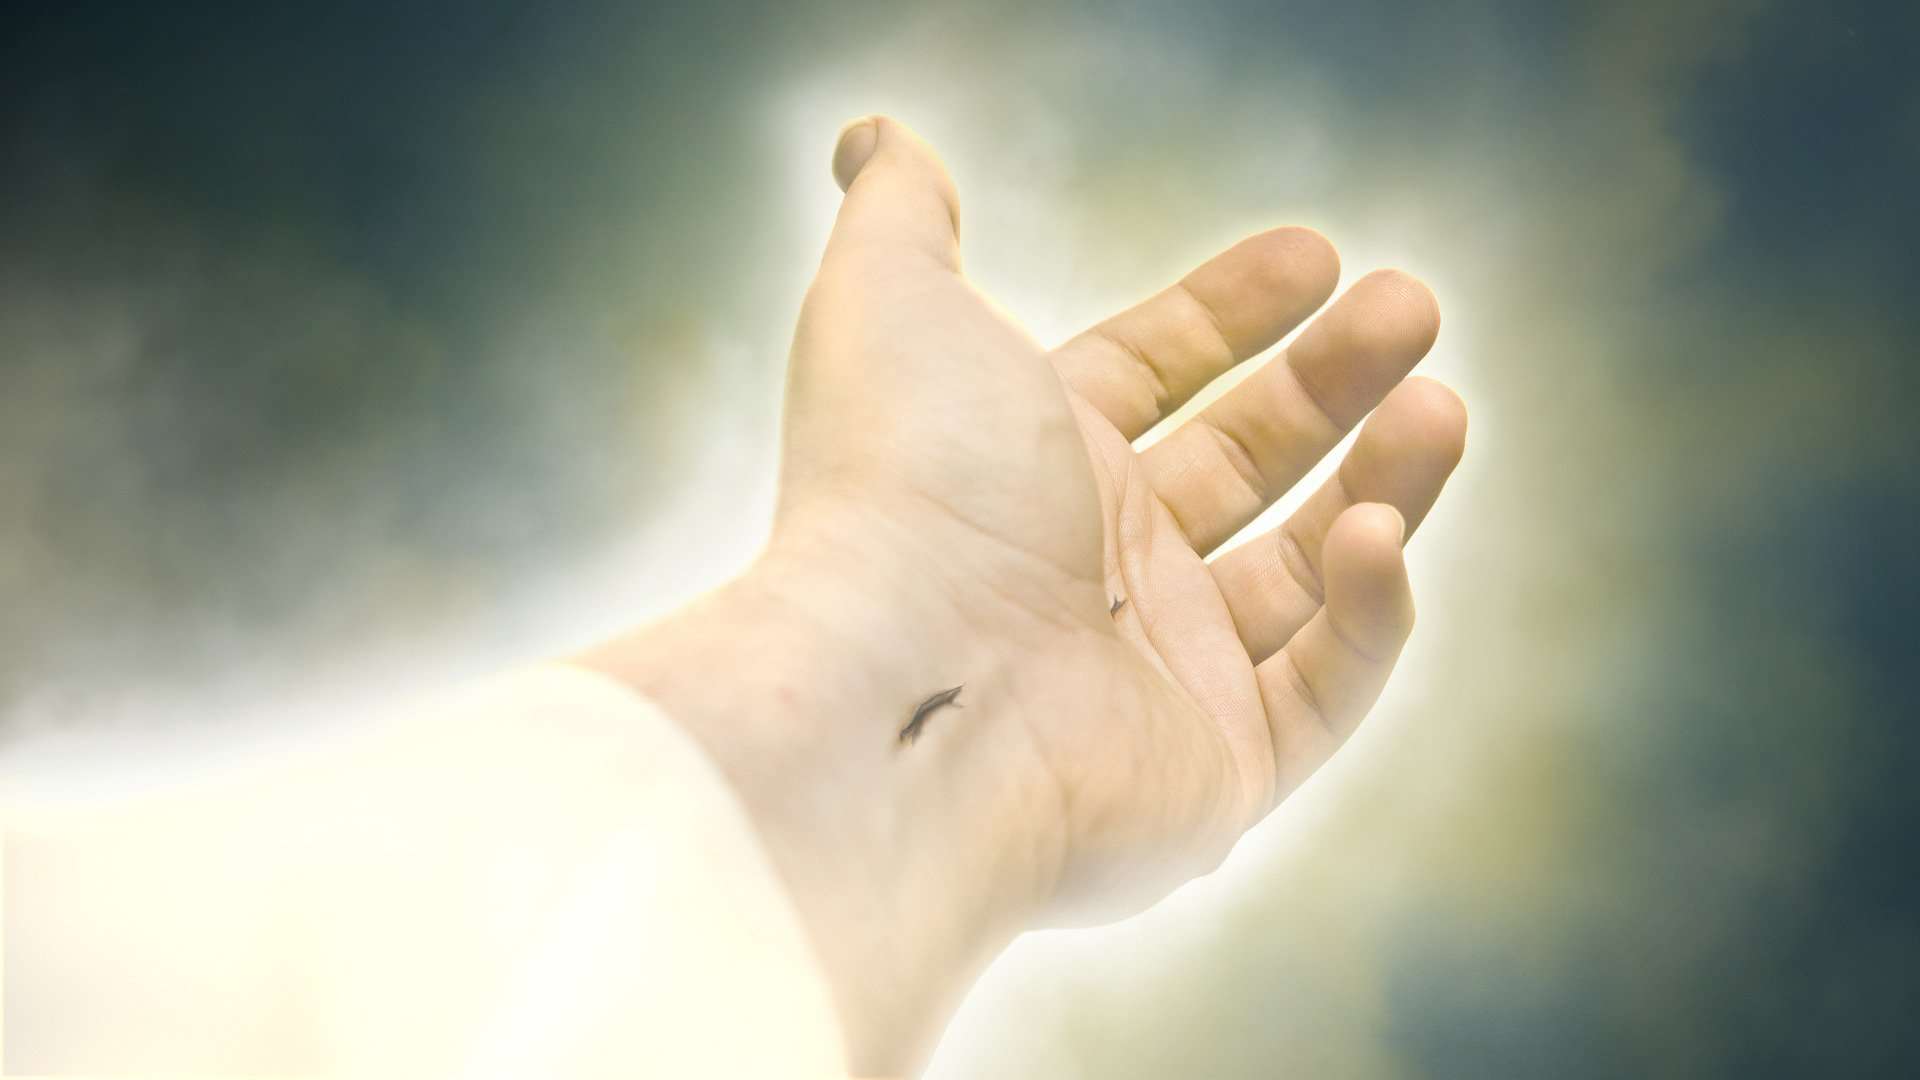 A palm up hand appearing to be Jesus' is shown in an aura of light with a piercing on the wrist.